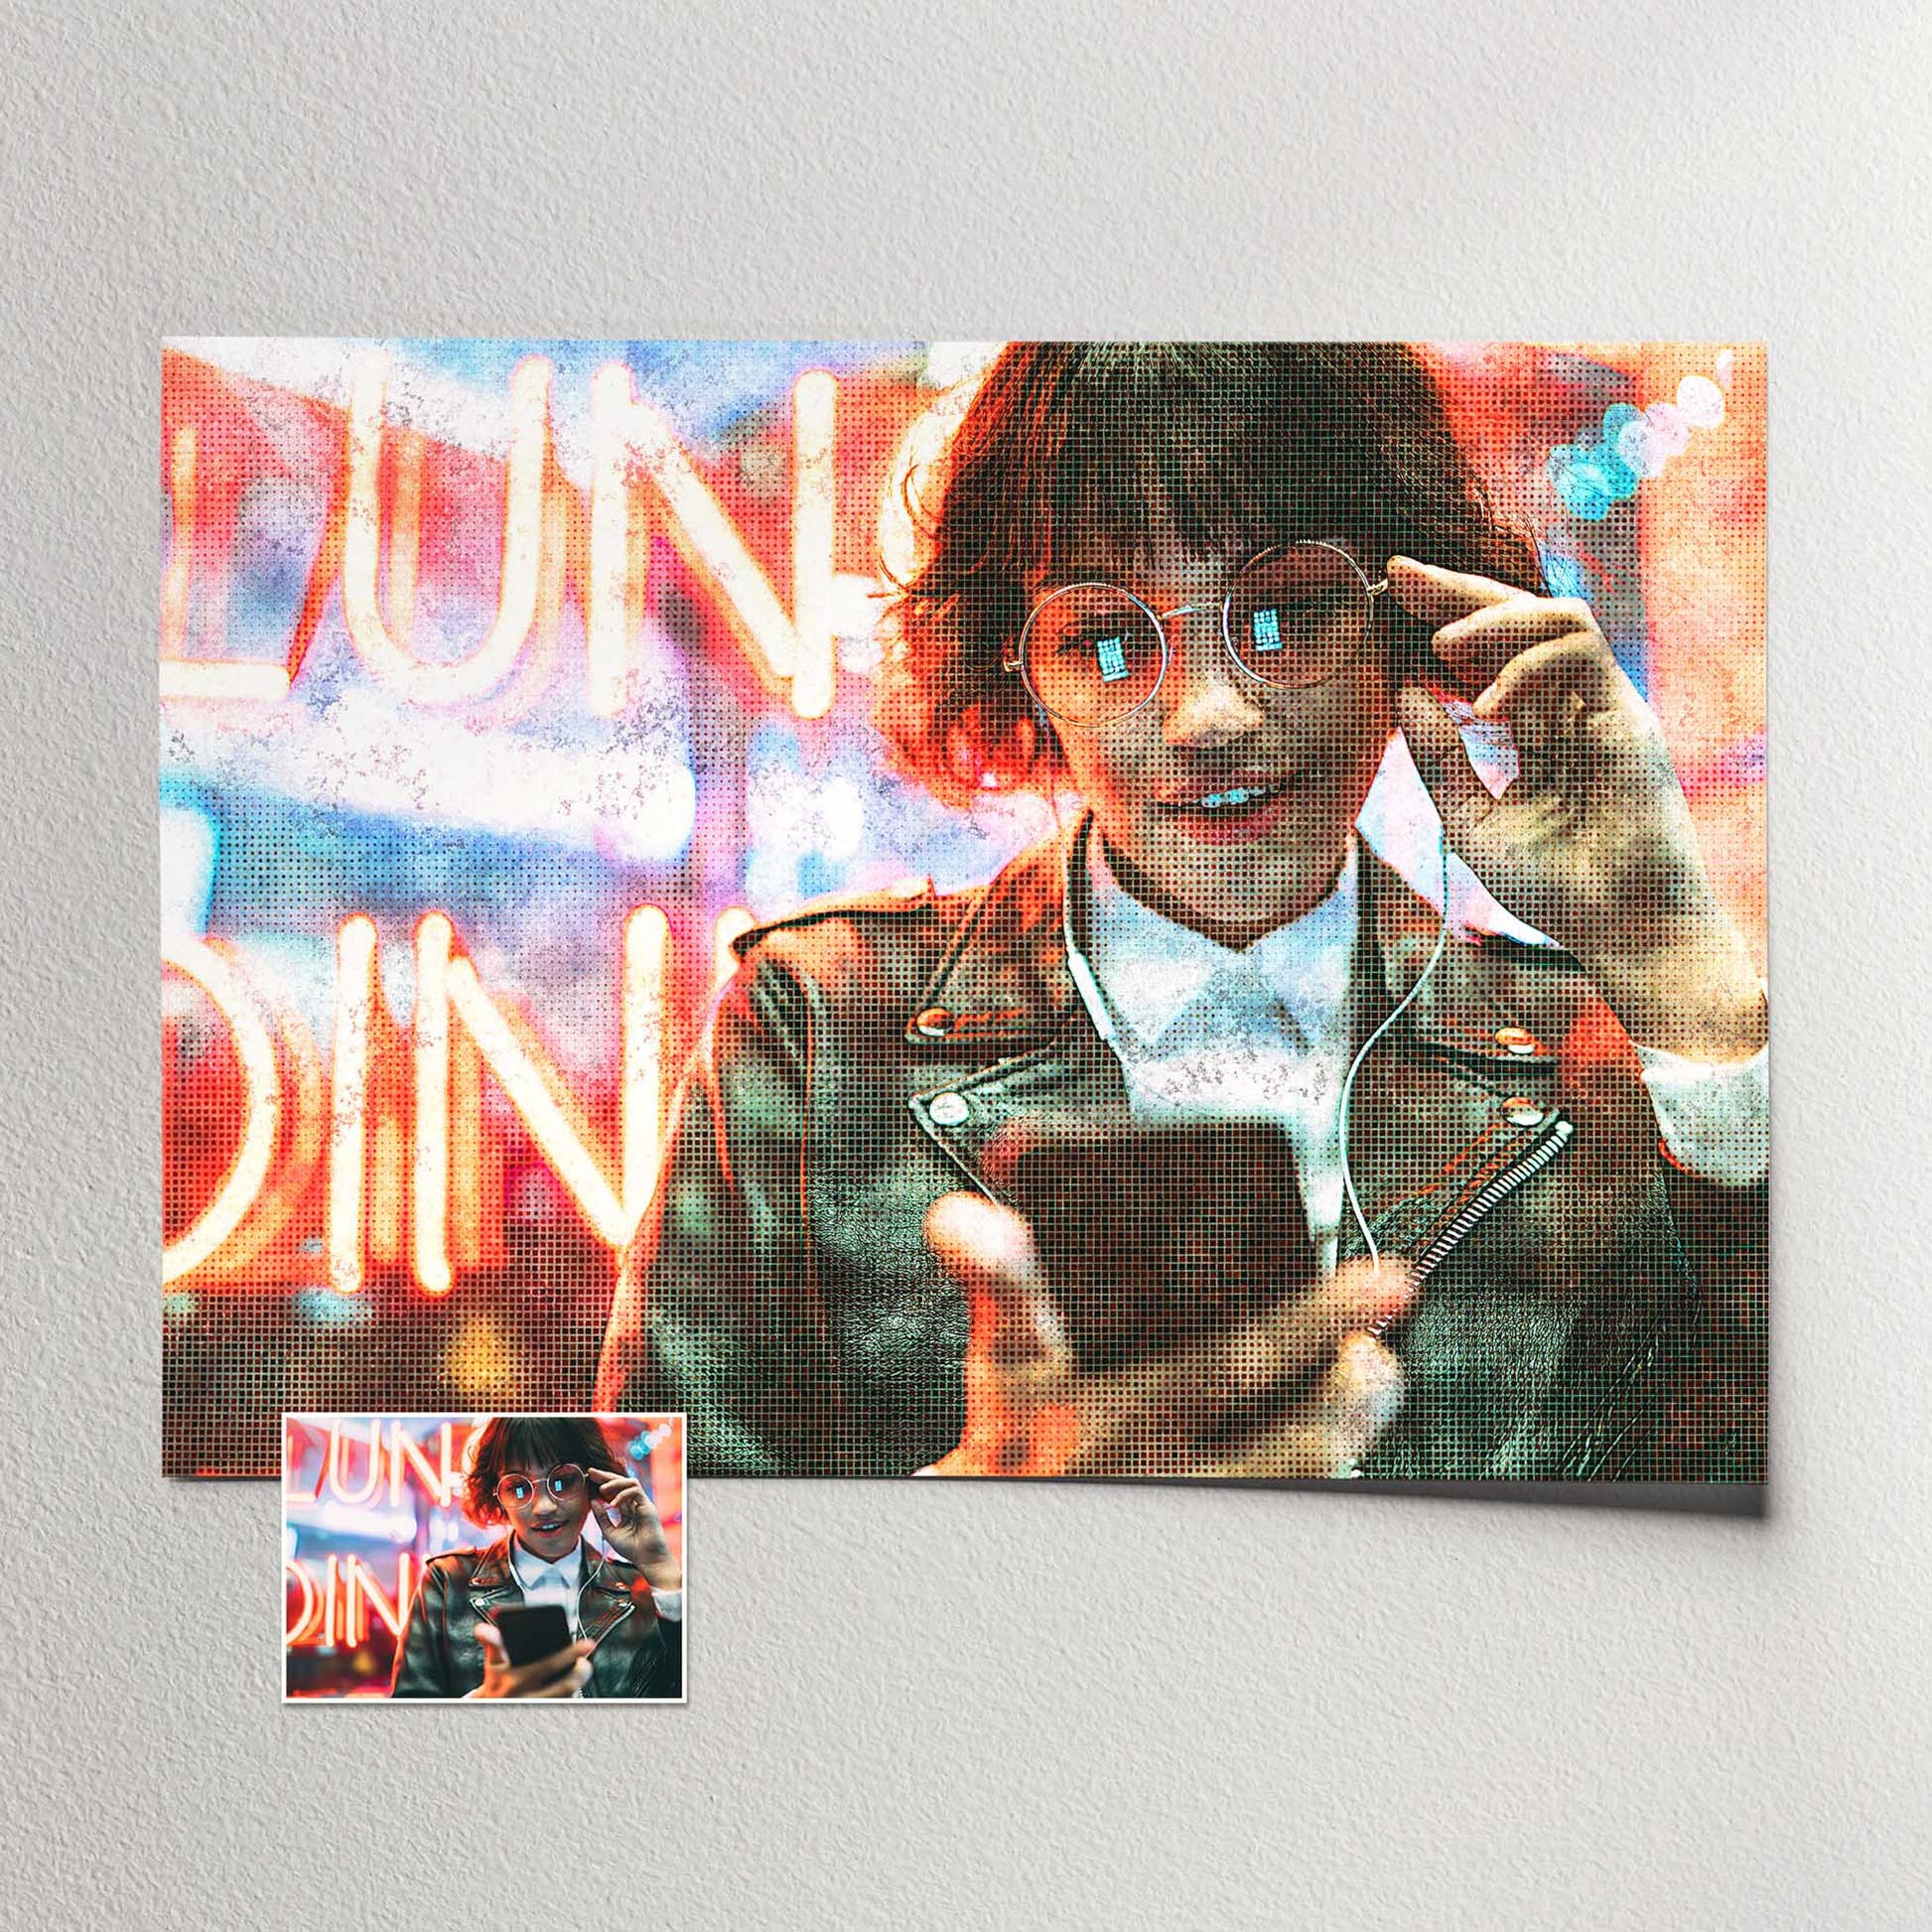 Bring back the bold and beautiful era of the 90s with our Personalised Grunge FX Print. The captivating movie grunge filter and old school halftone effect create a legendary retro vibe. Feel the energy and excitement of this wall art 